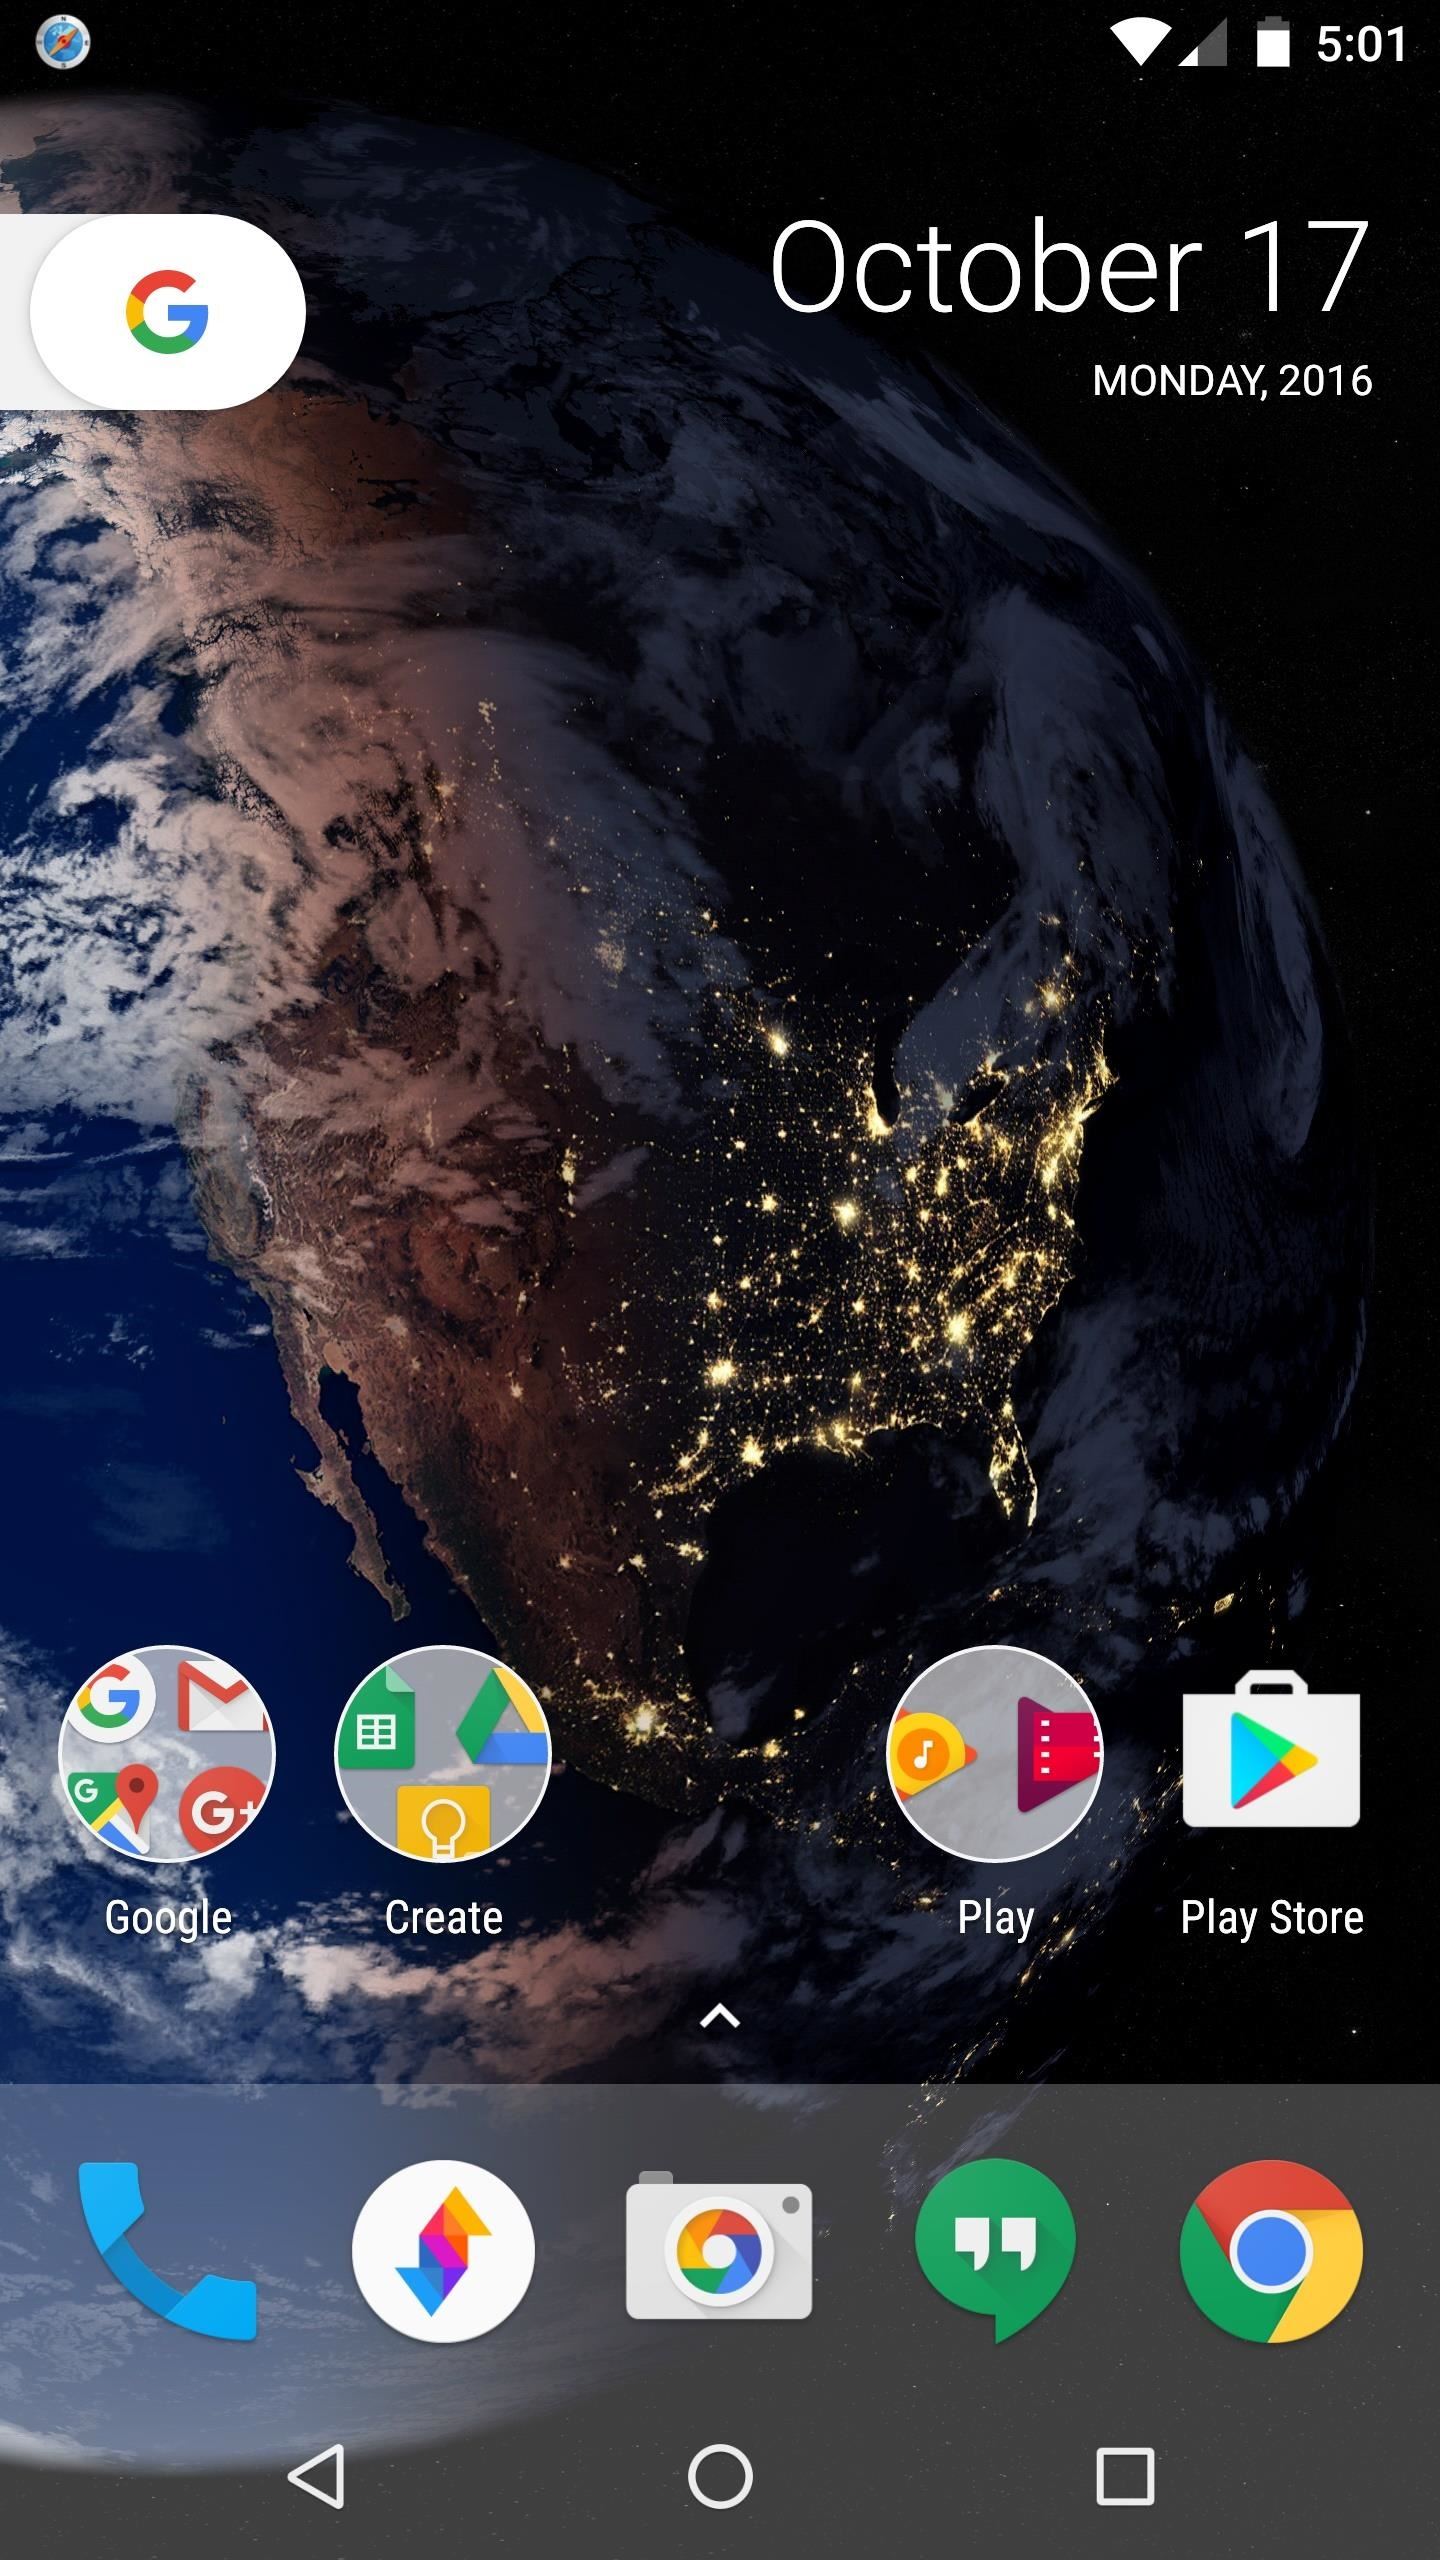  Amazing New 39;Live Earth39; Wallpapers on Your Android Device « Android